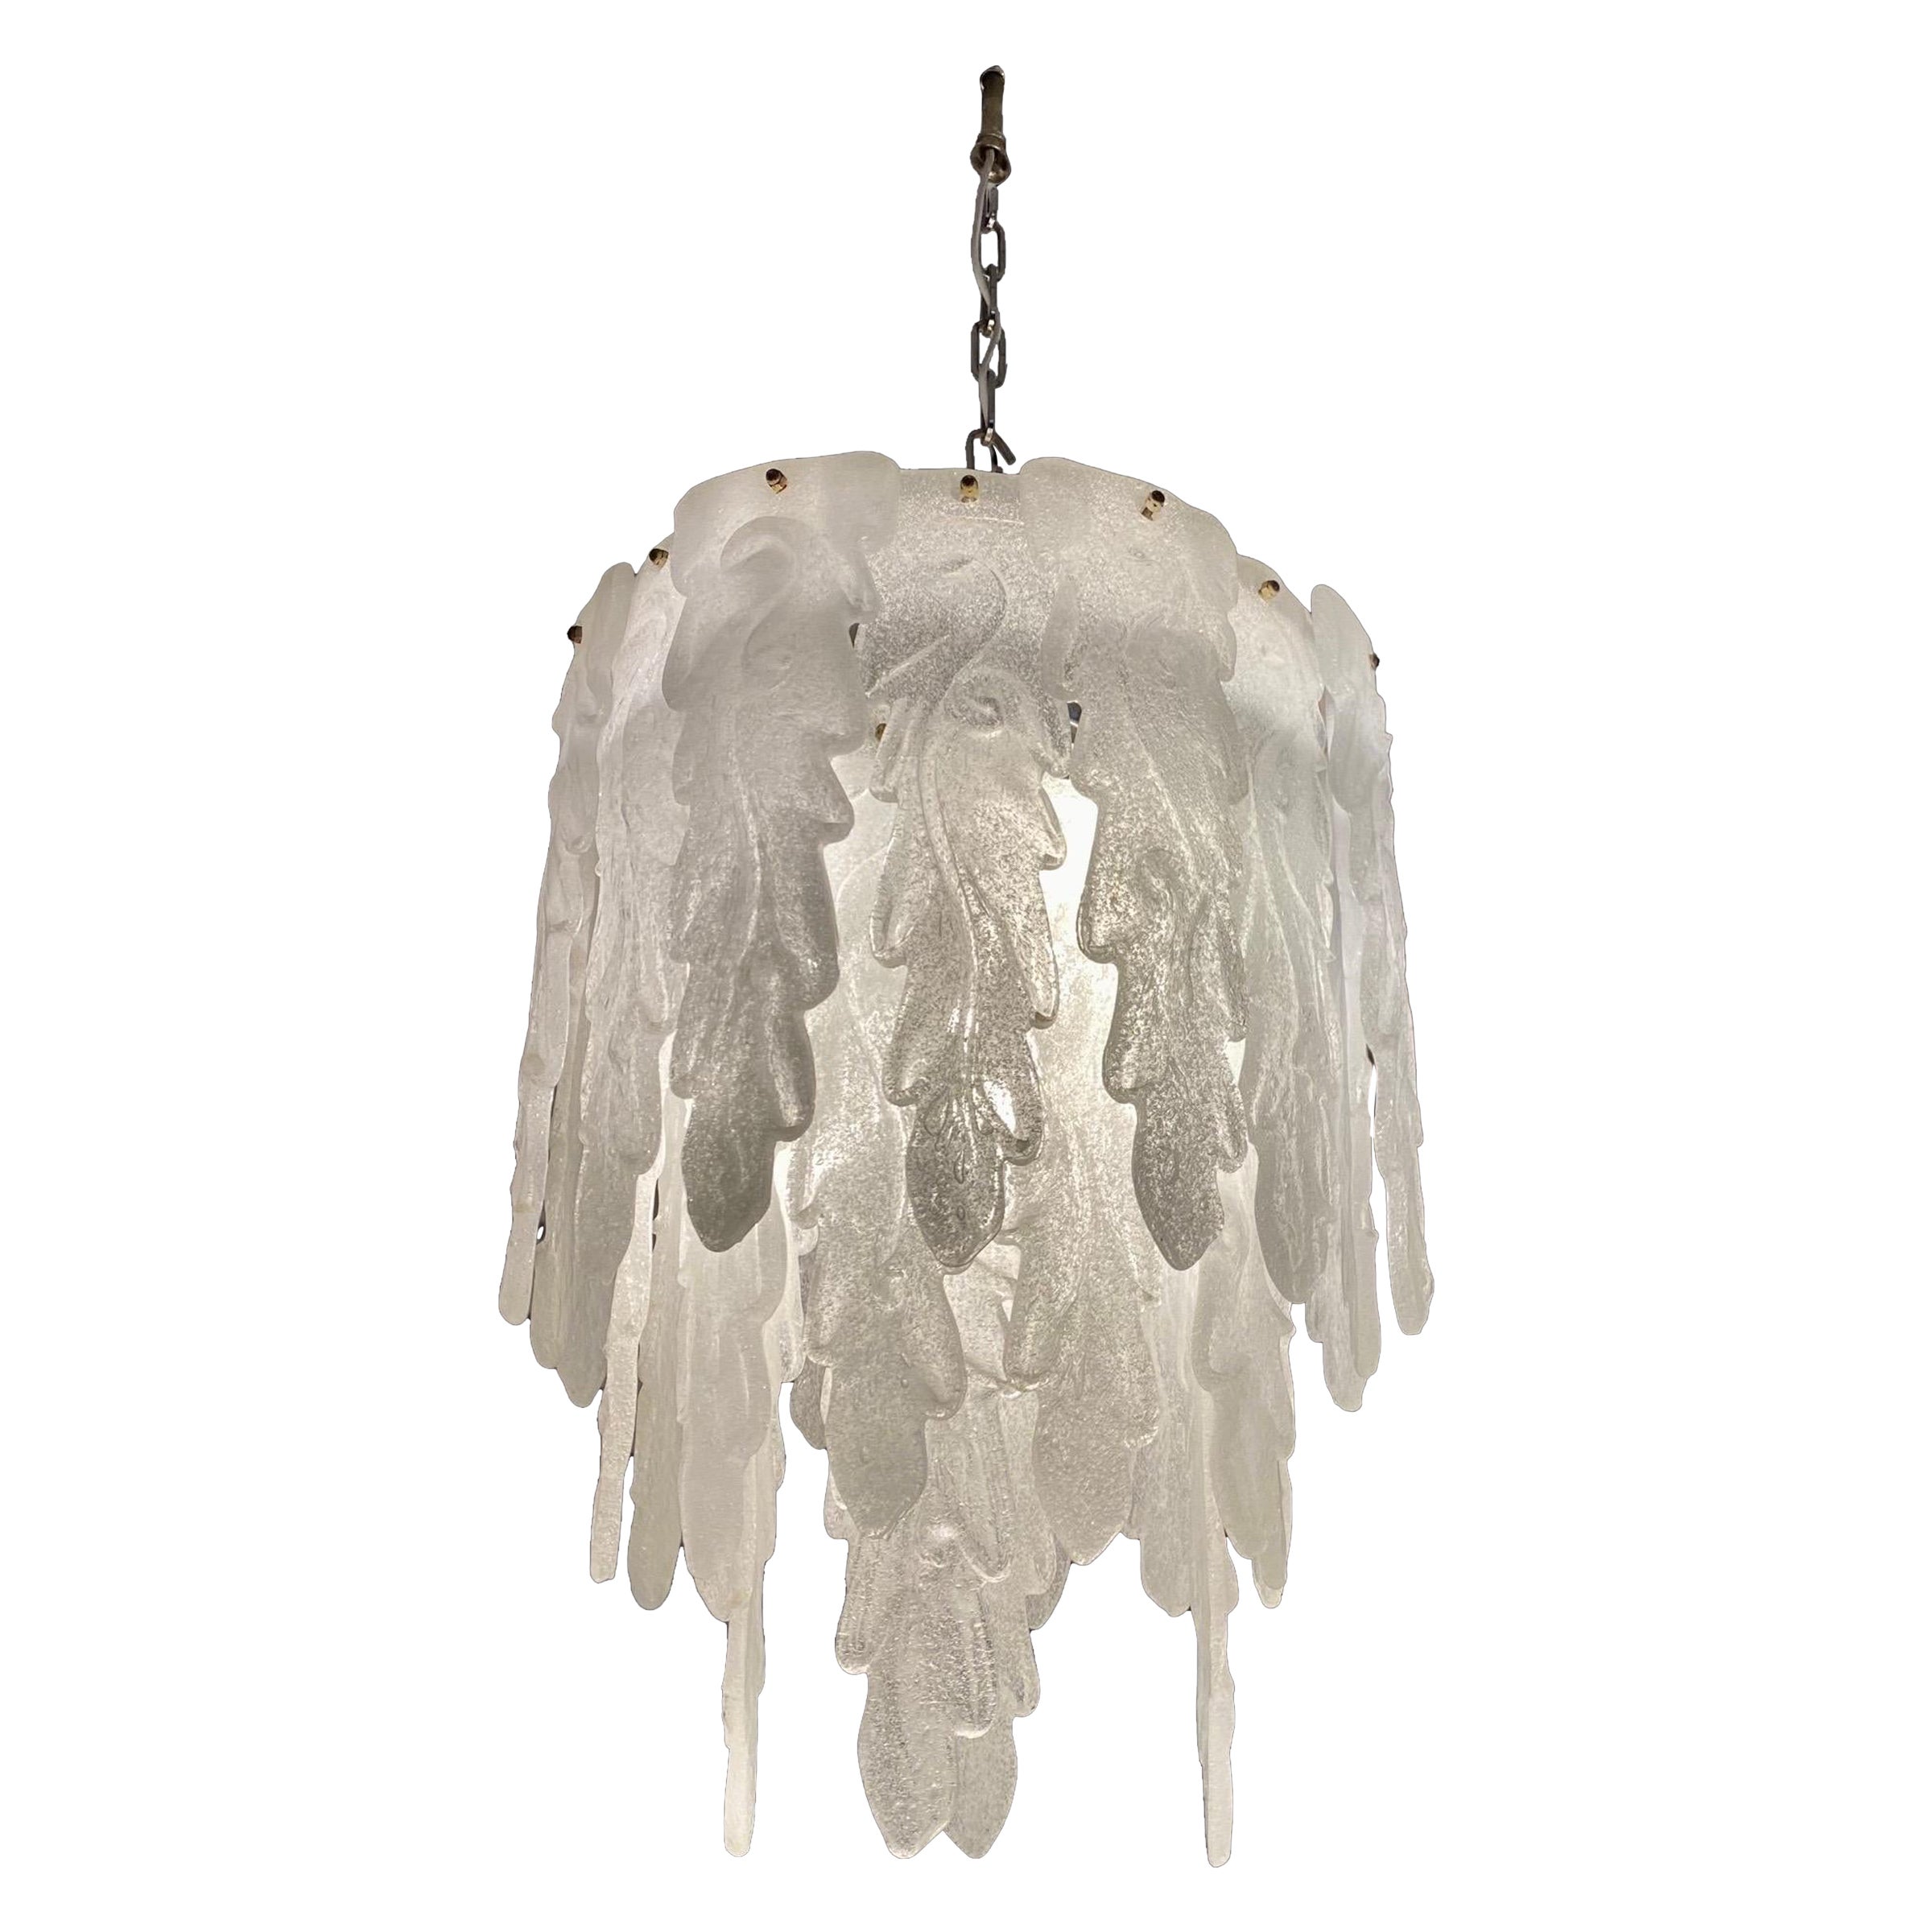 Carlo Nason by Mazzega Chandelier Ice Frost Glass Murano, Italy, 1970 For Sale